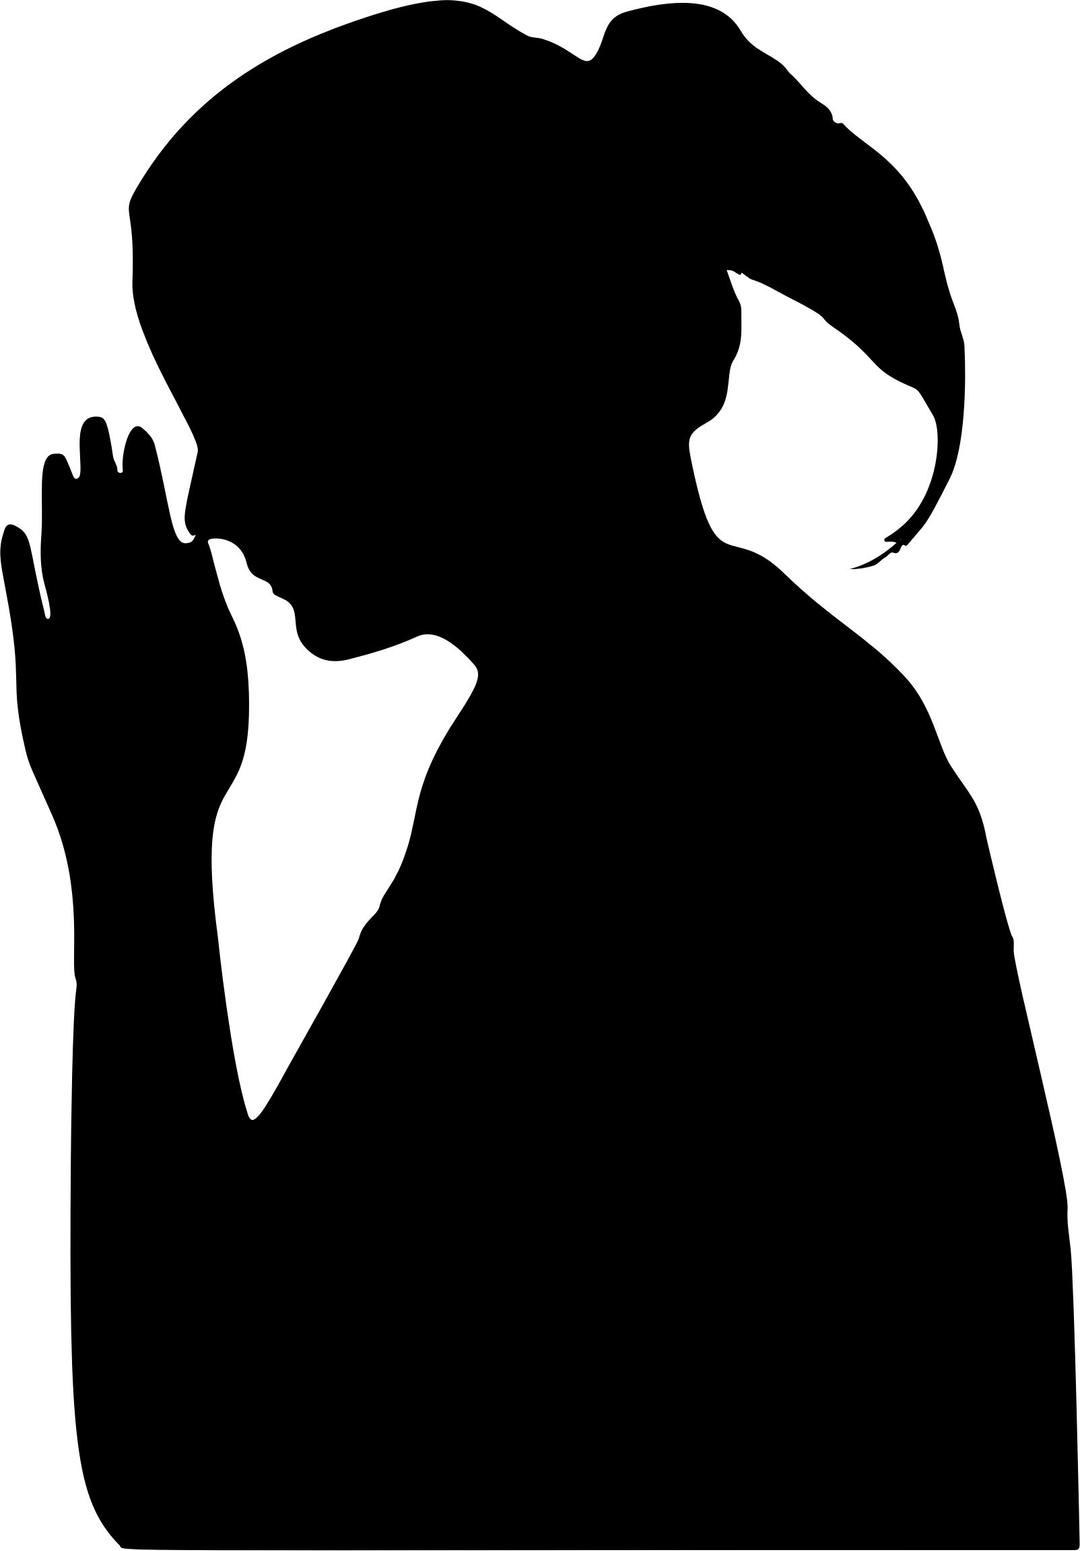 Meditating Woman Silhouette 2 png transparent